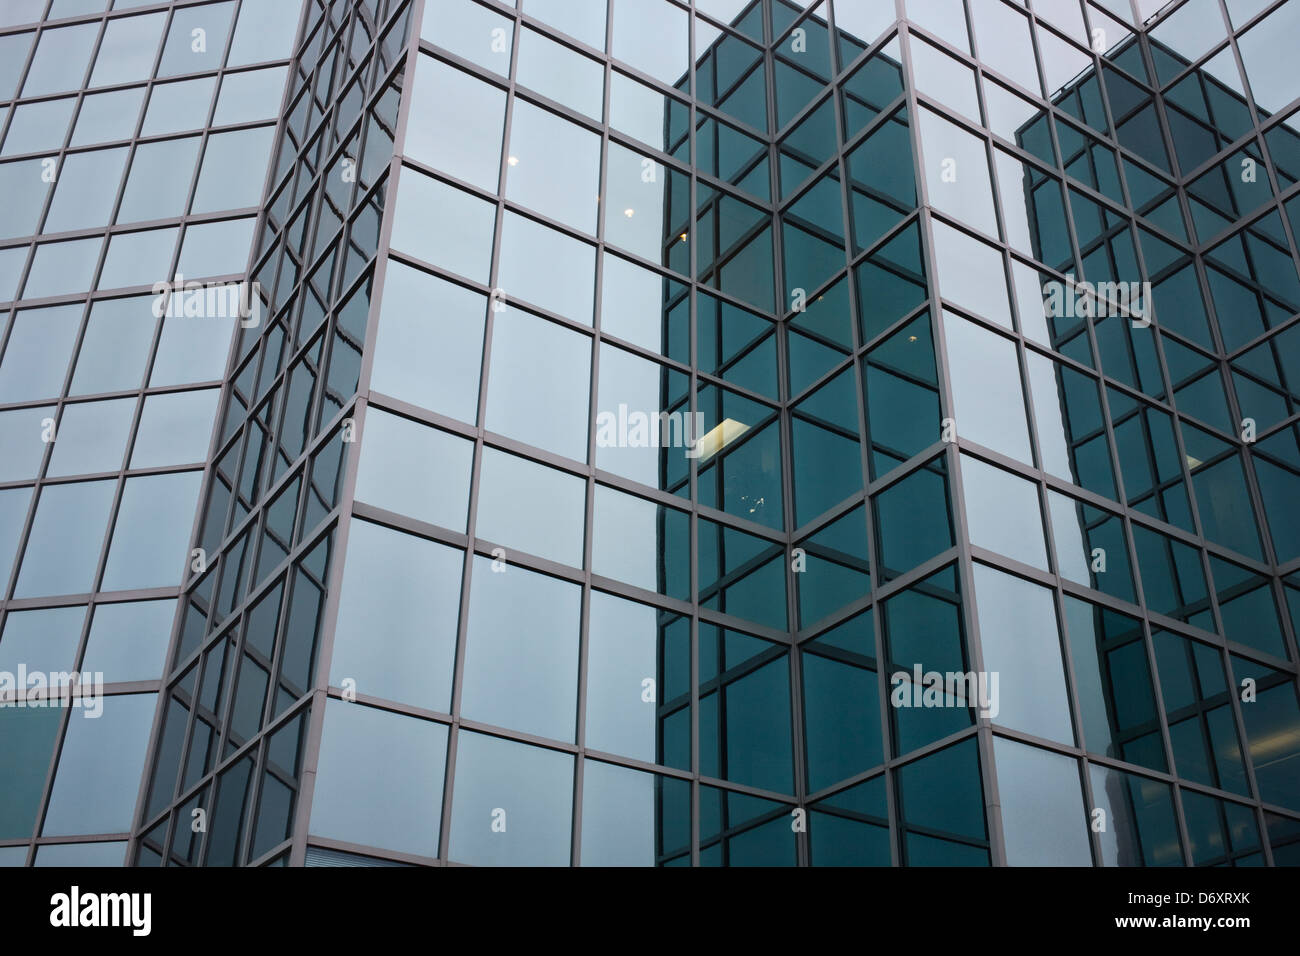 Abstract view of office building windows Stock Photo